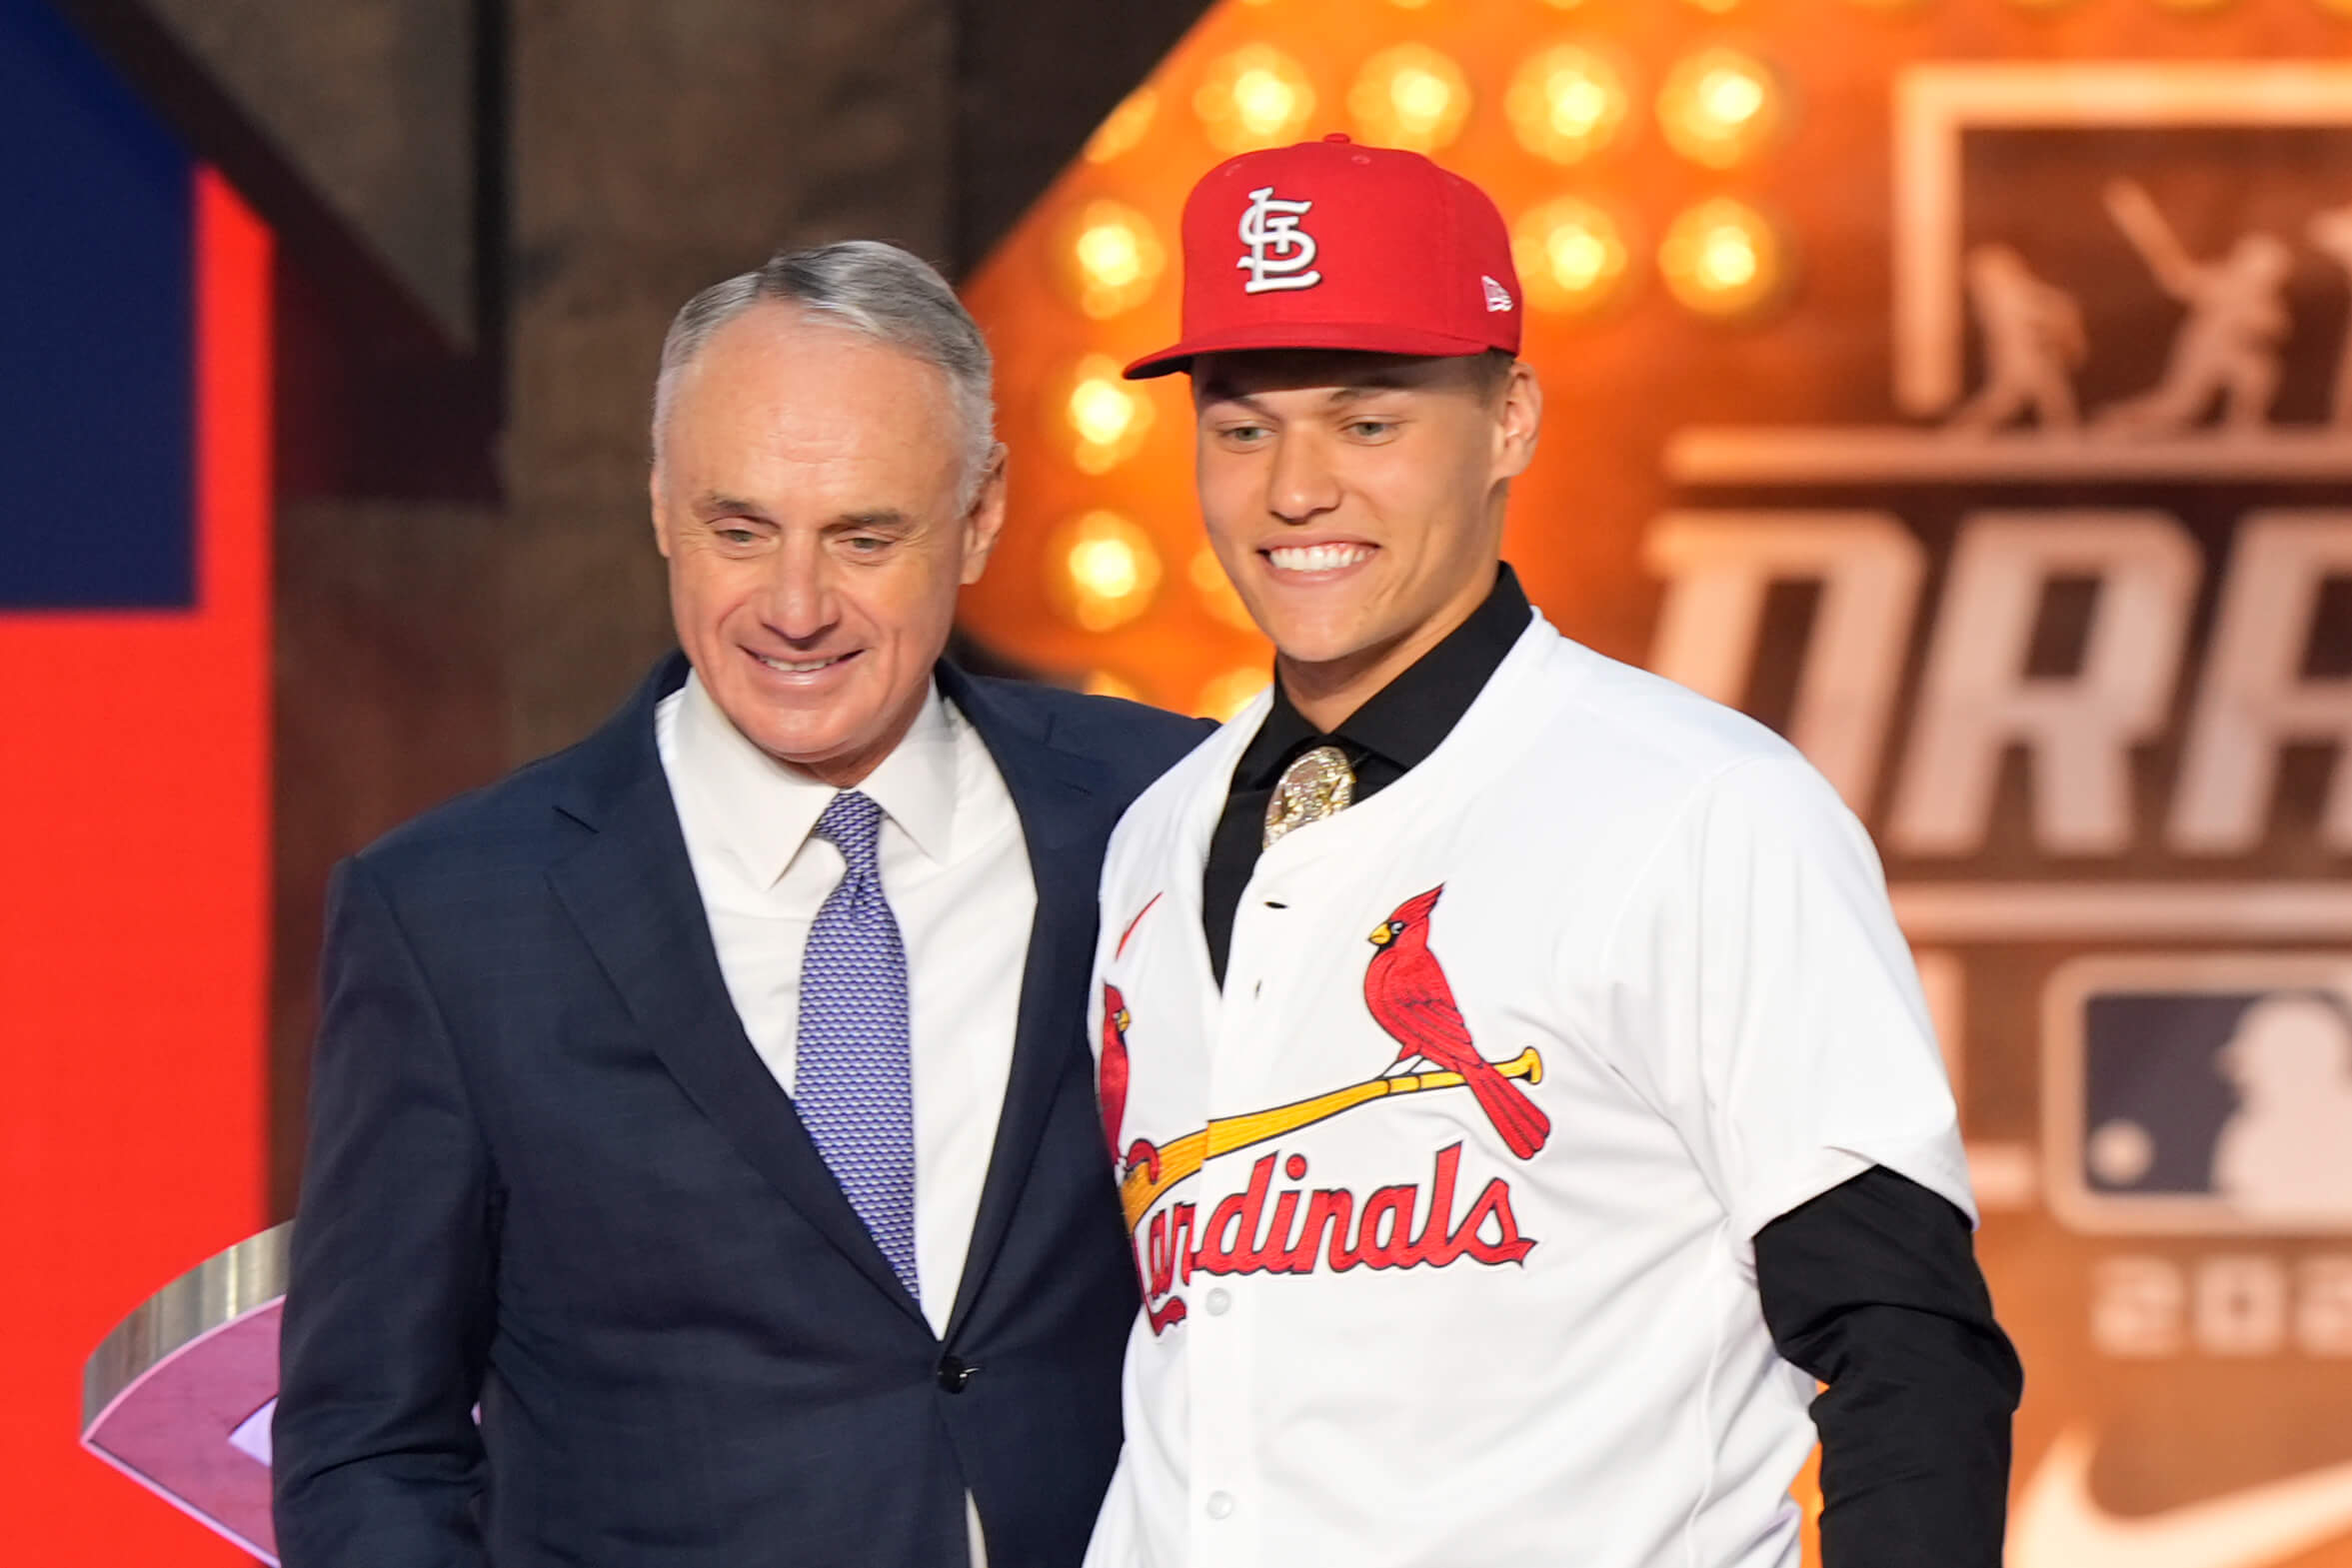 Cardinals draft JJ Wetherholt with No. 7 pick: 'They’re getting a baller'